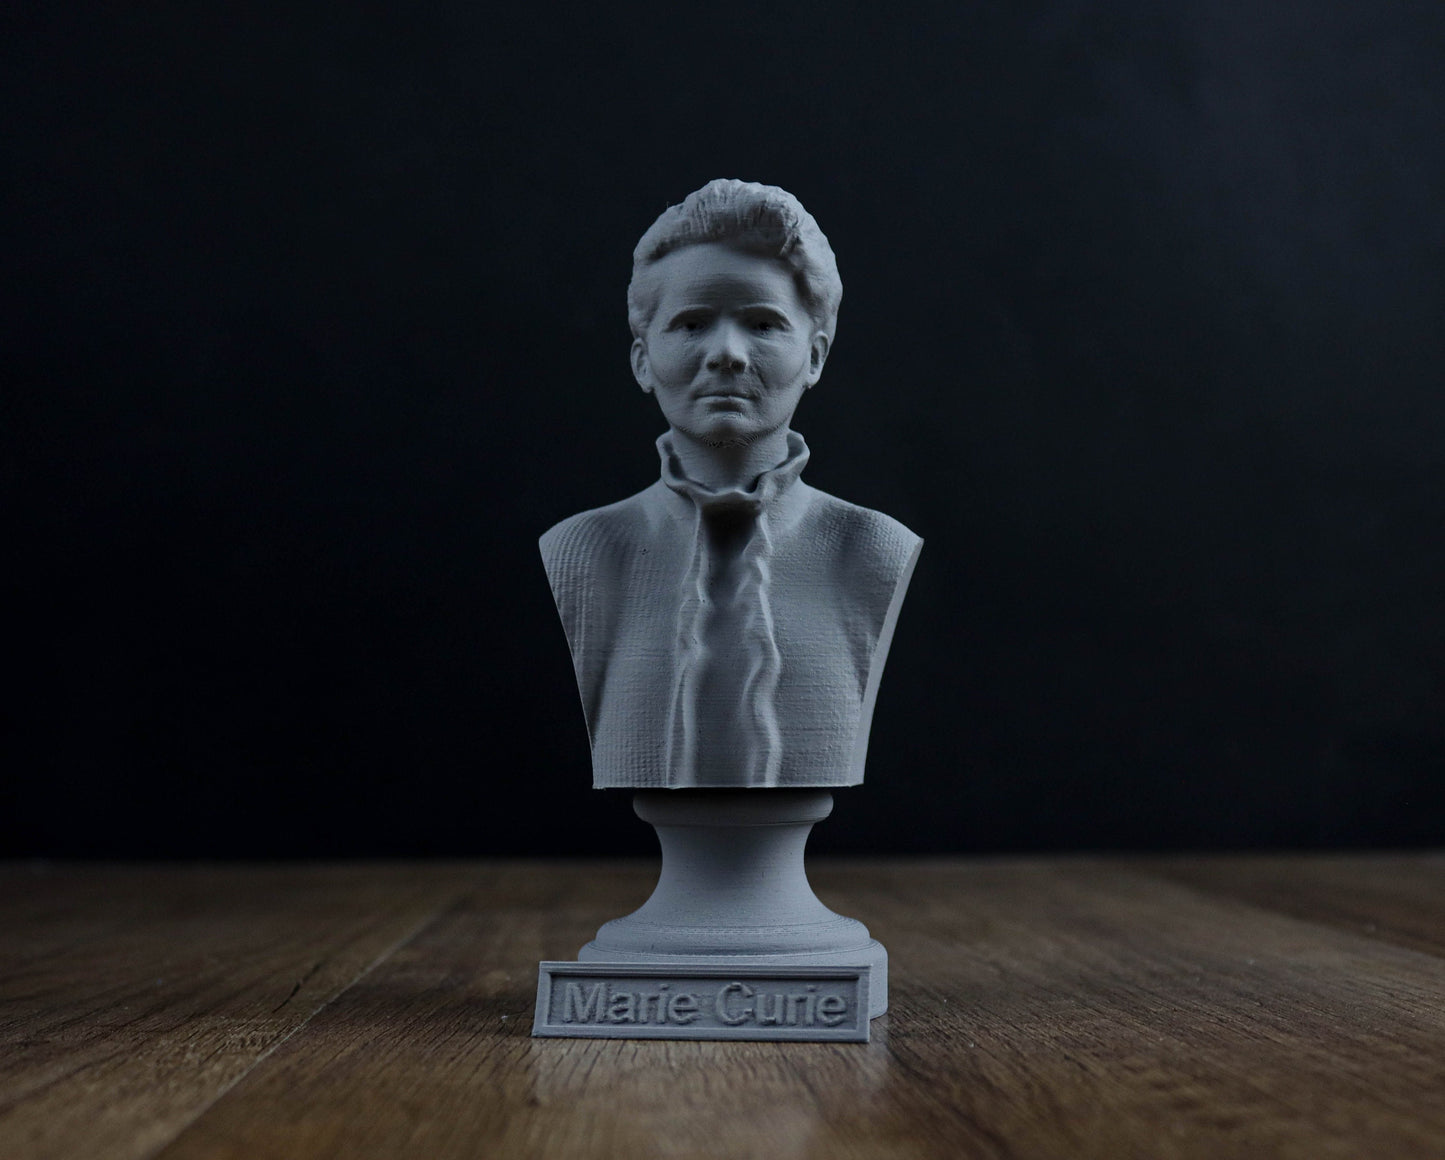 Marie Curie Bust, Physicist and Chemist Pioneer, Sculpture Decor